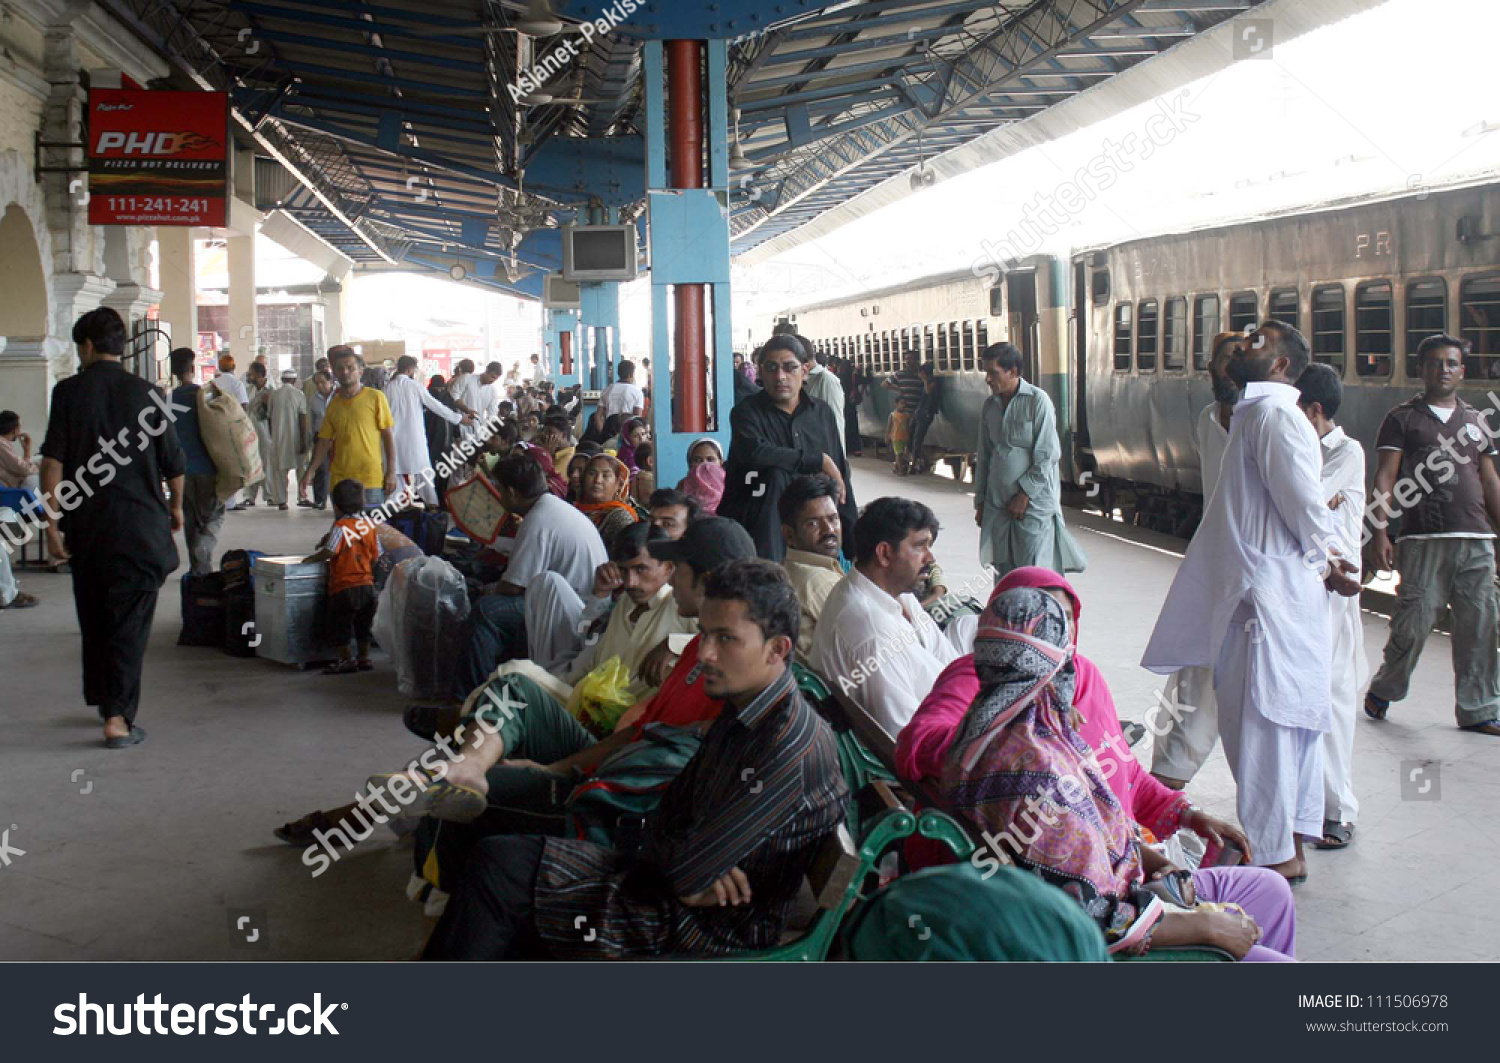 stock-photo-karachi-pakistan-aug-passengers-with-their-bags-gather-at-platform-as-trains-are-late-from-111506978.jpg